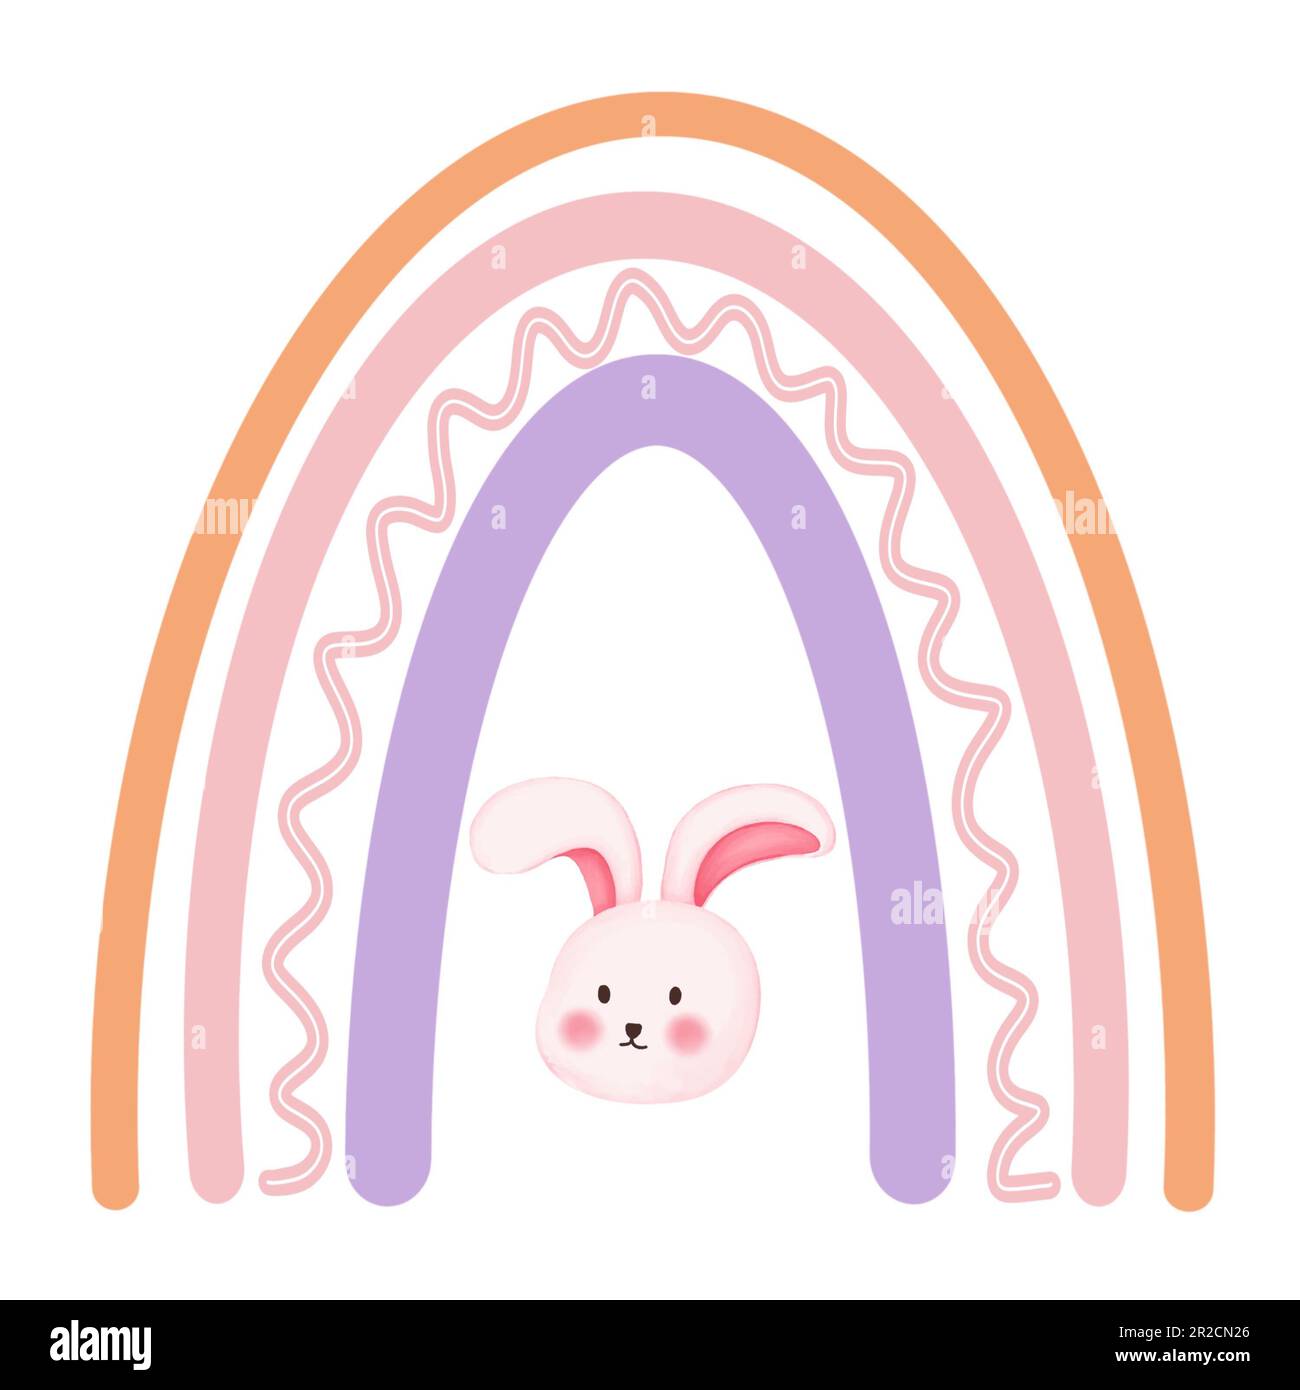 Easter rainbow and bunny illustration isolated on white background.Easter day,baby shower,wallpaper,scrapbook, etc. Stock Photo